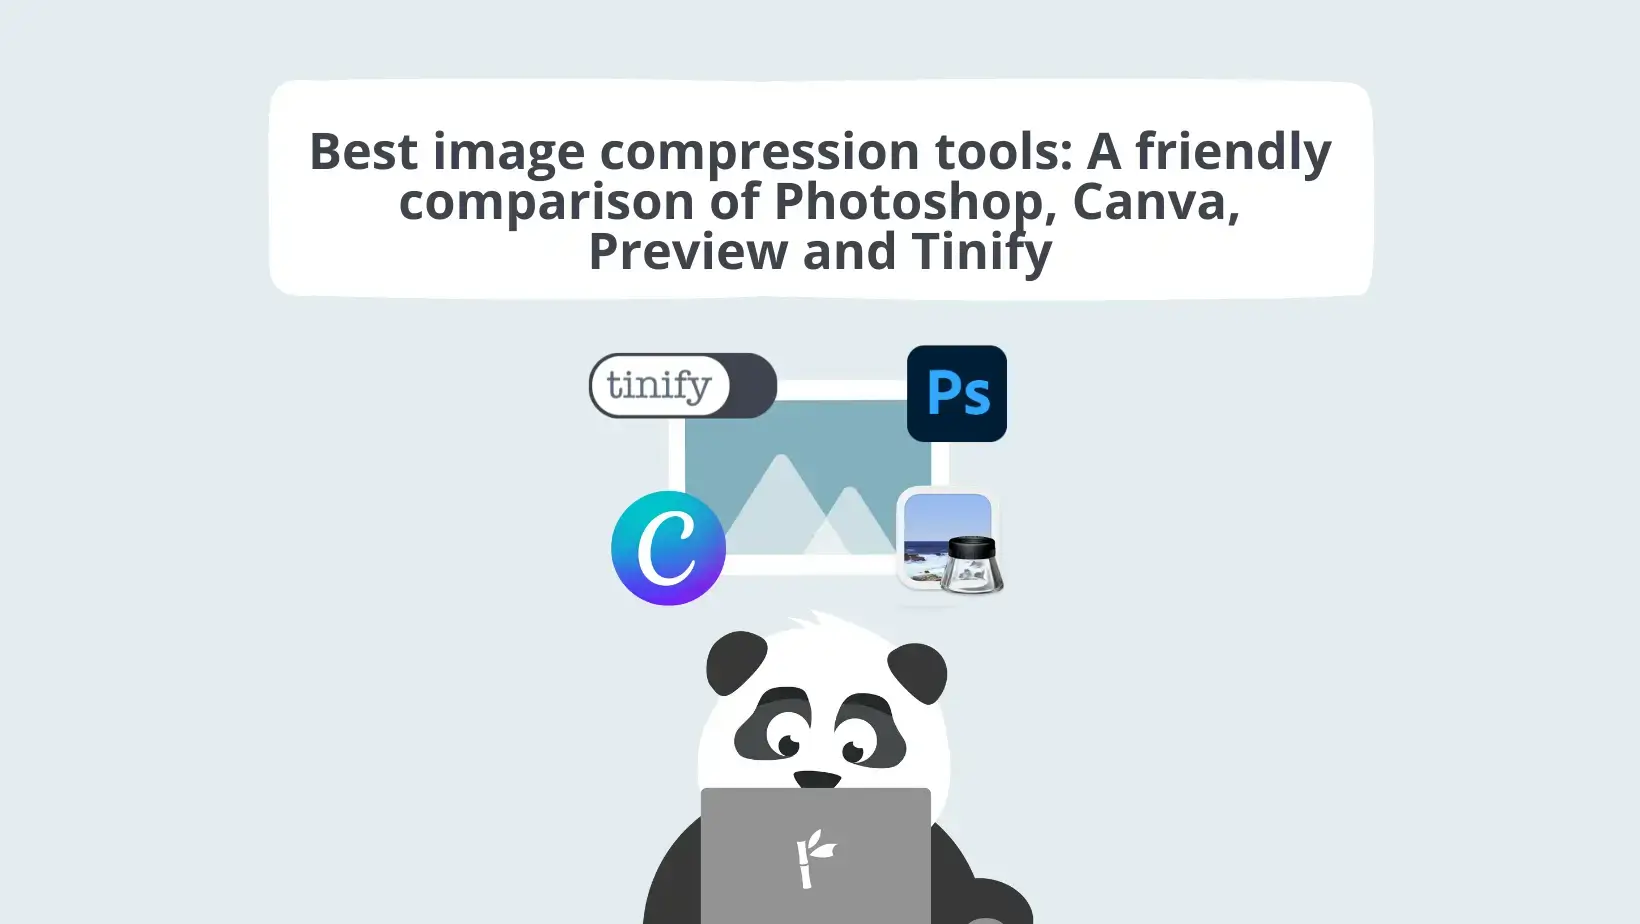 Best image compression software: A friendly comparison of Photoshop, Canva, Preview and Tinify (TinyPNG)